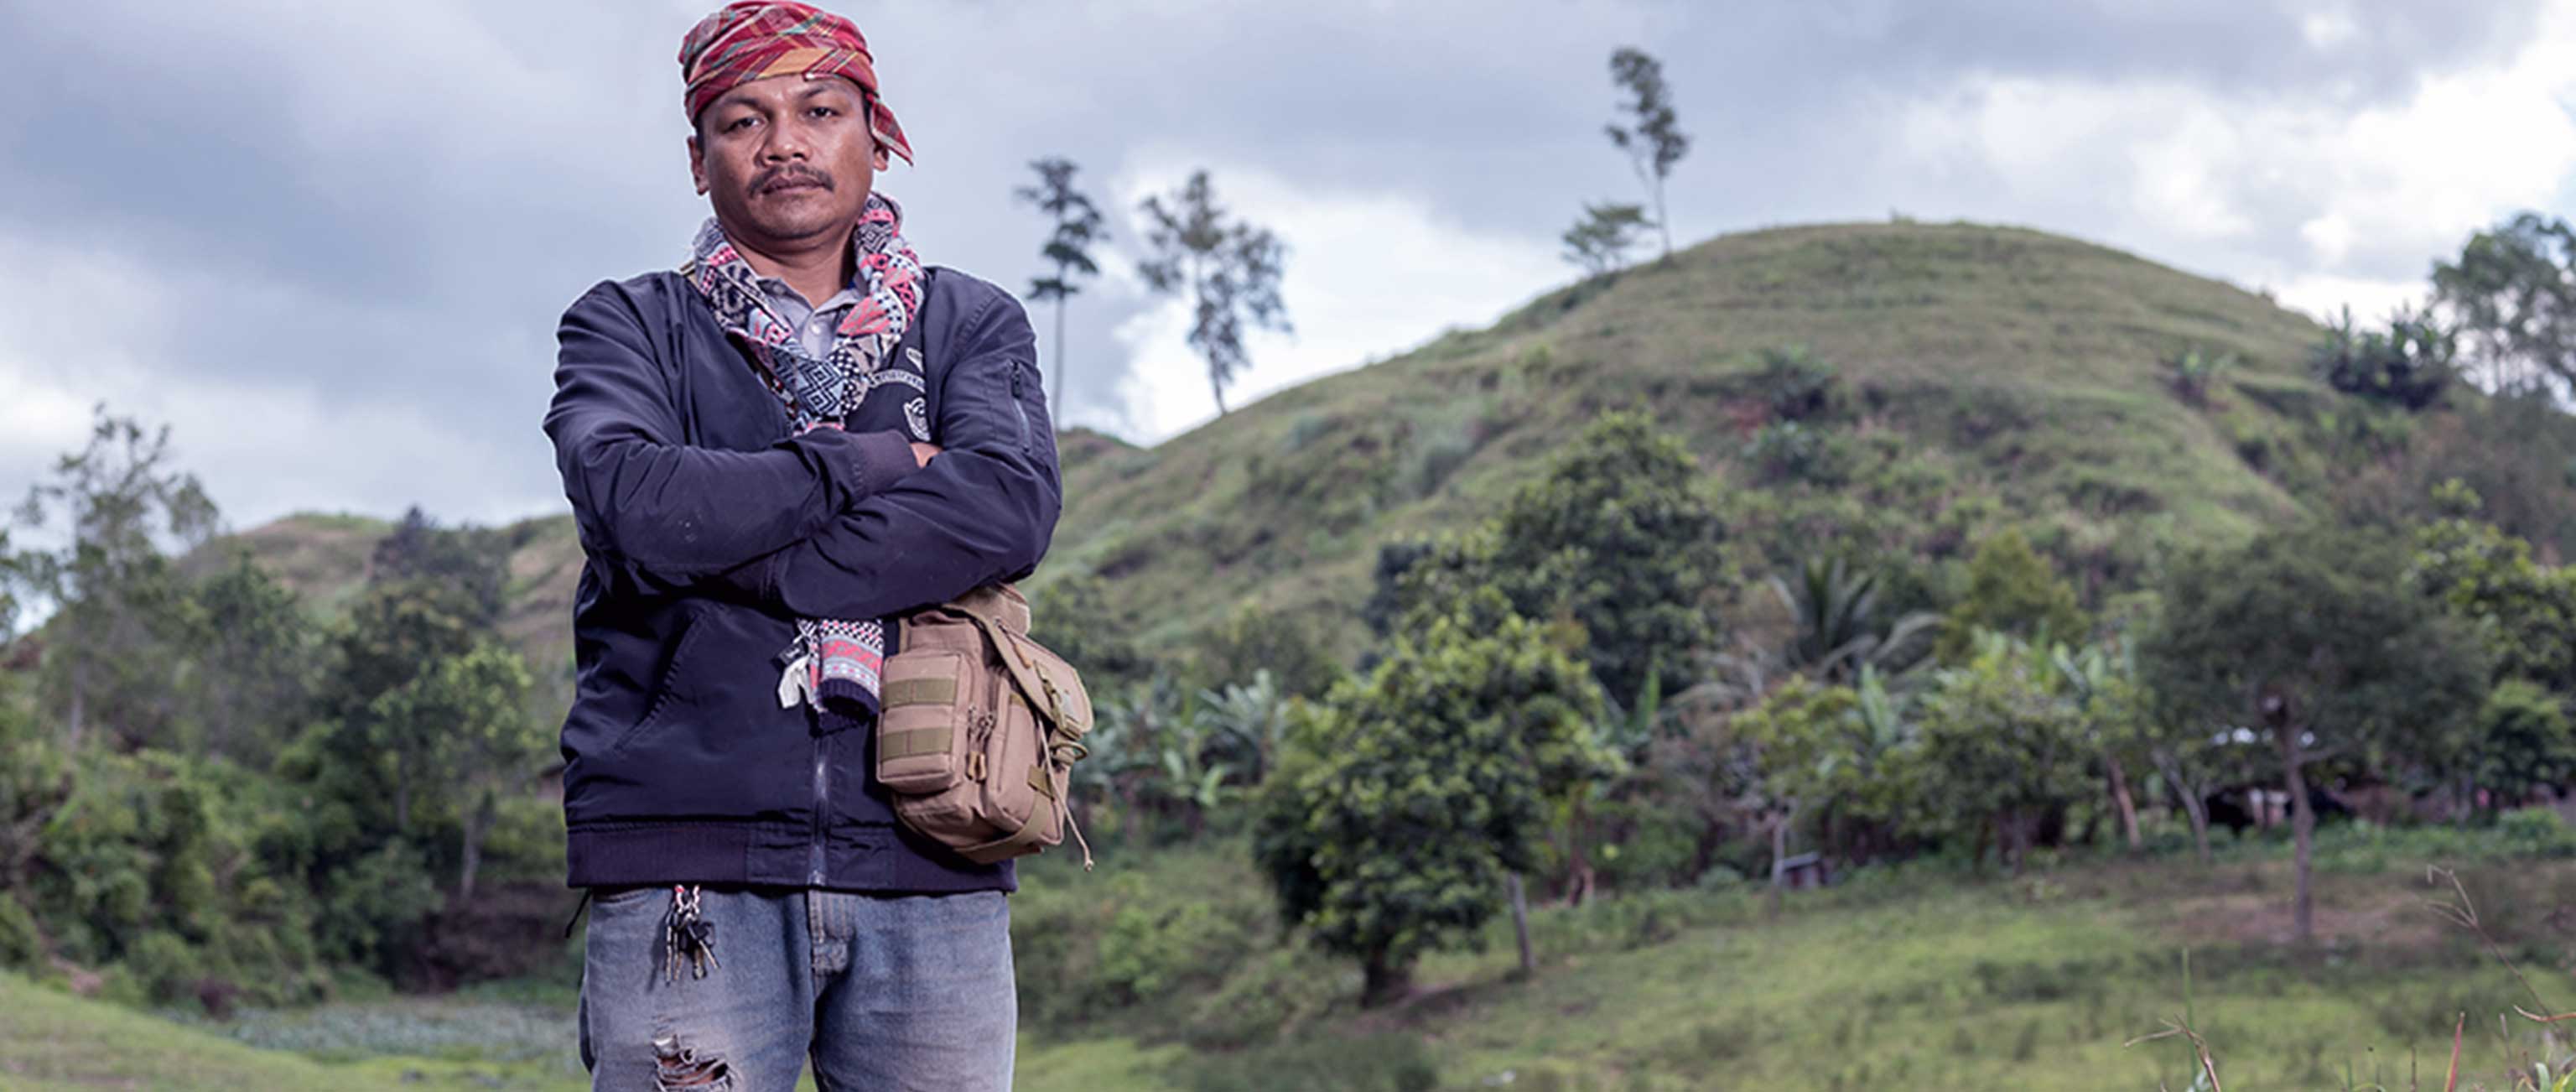 Bloodiest Year on Record (Again) for Environmental Defenders